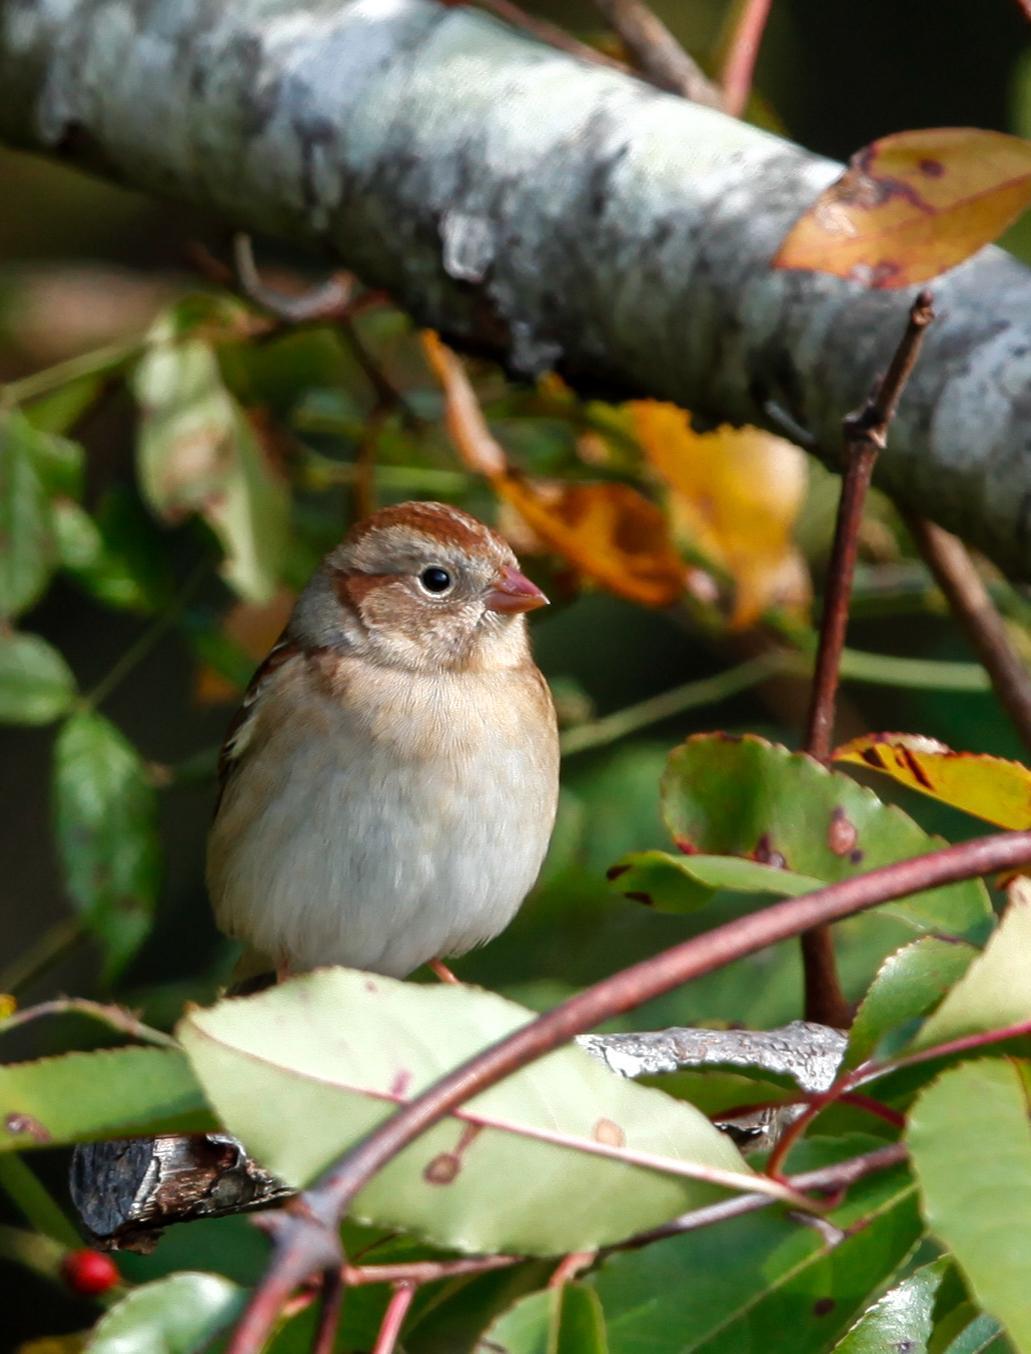 Field Sparrow Photo by Lucy Wightman